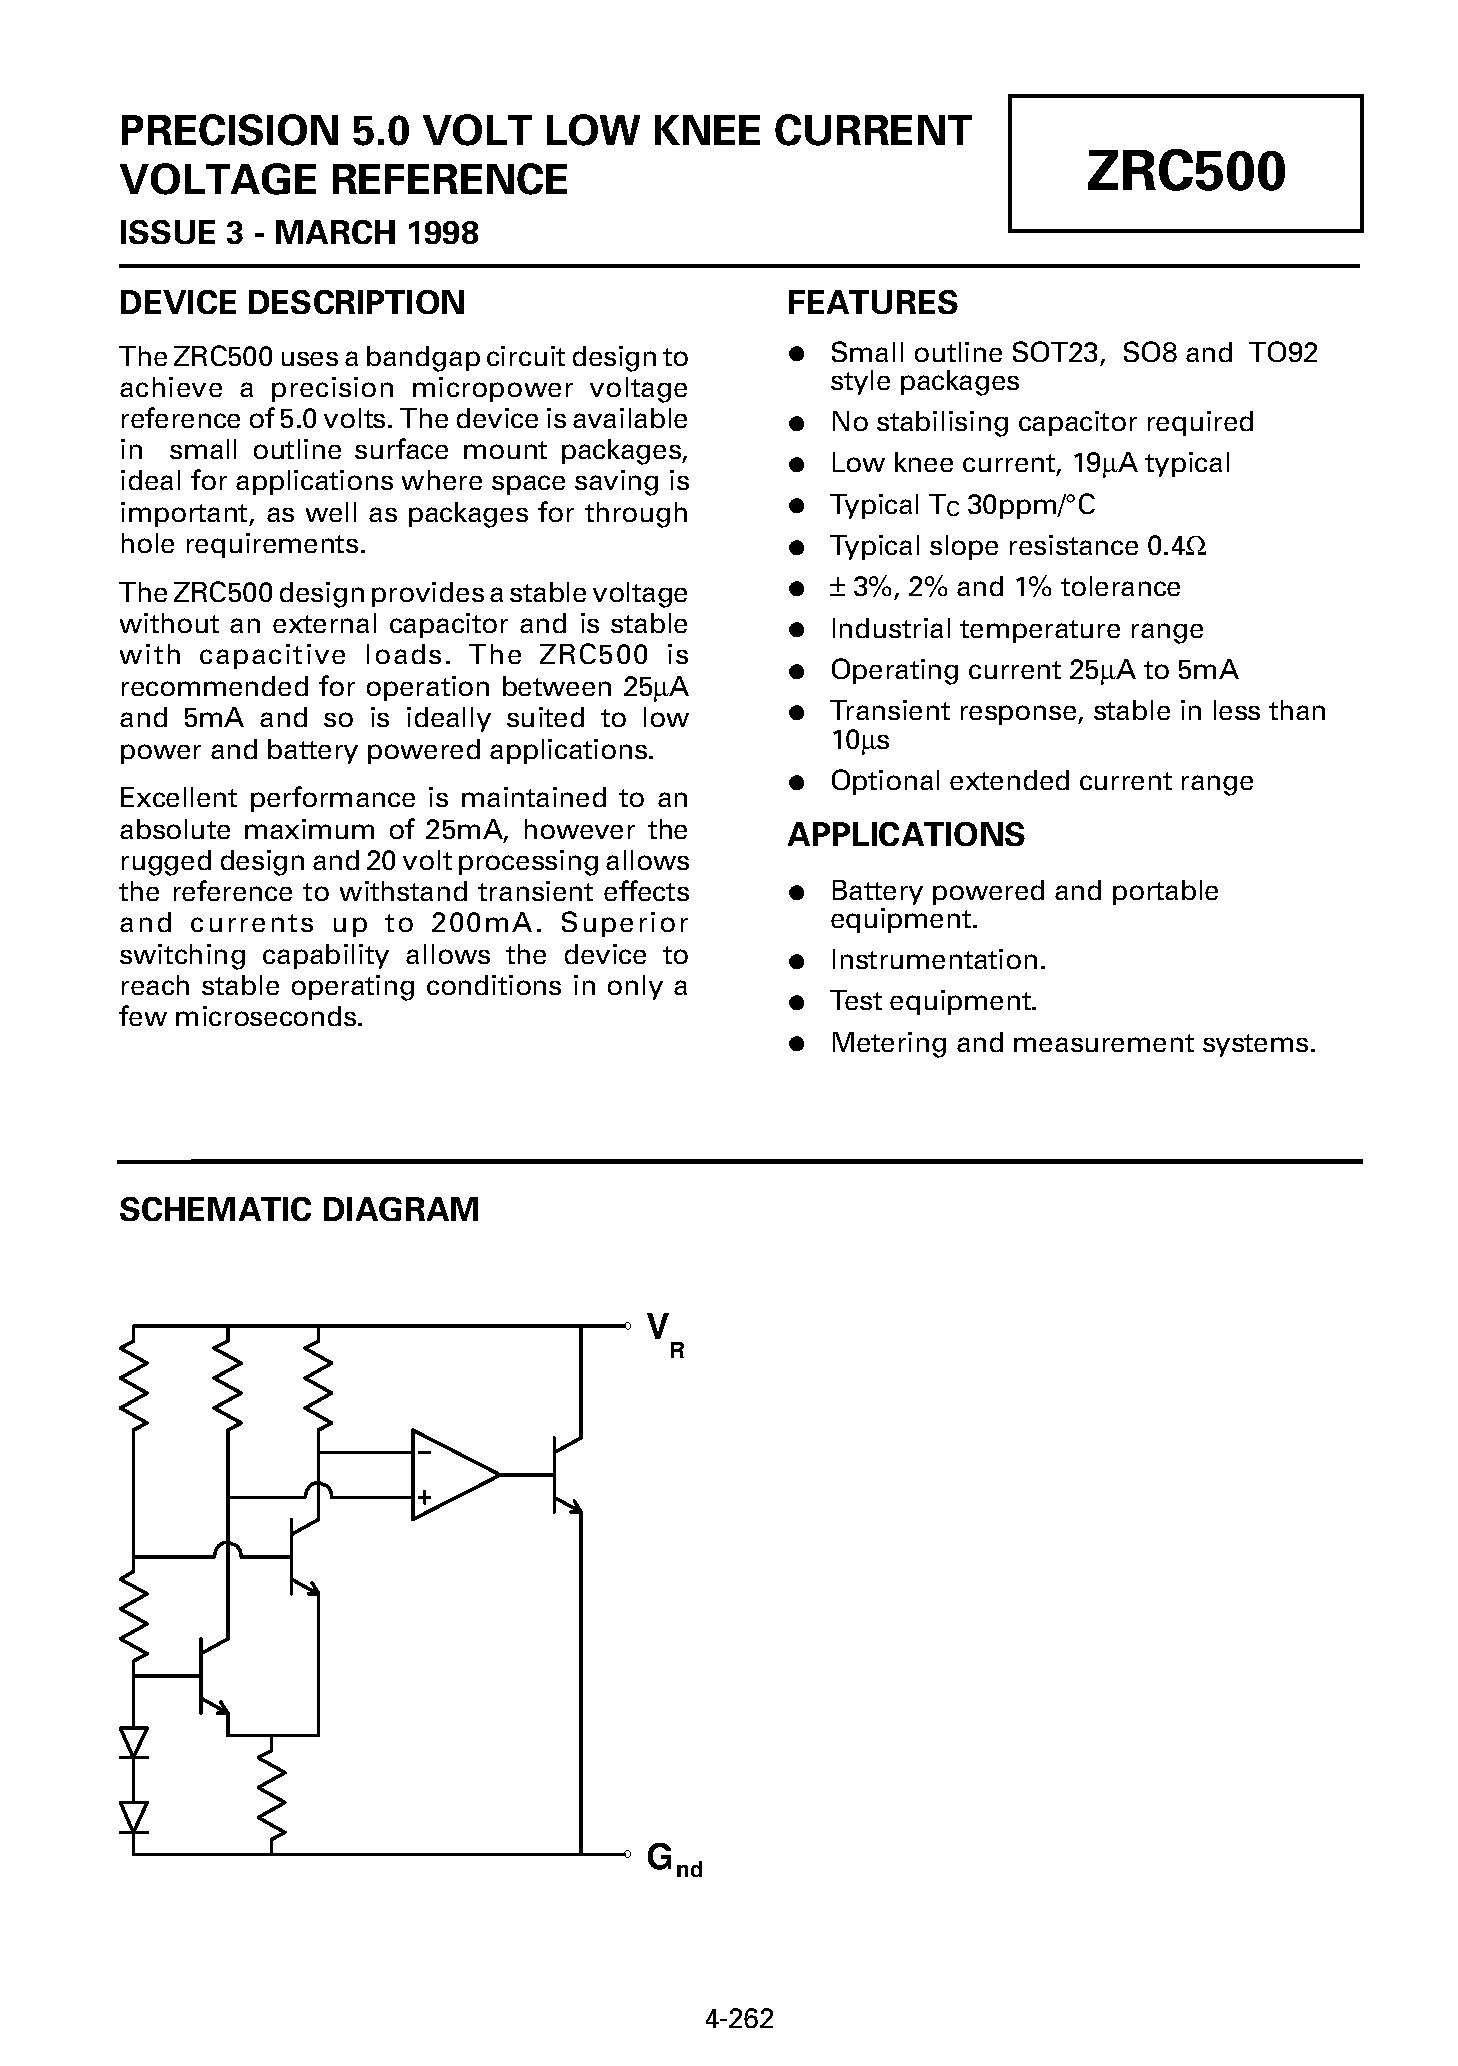 Datasheet ZRC500F02 - PRECISION 5.0 VOLT LOW KNEE CURRENT VOLTAGE REFERENCE page 1